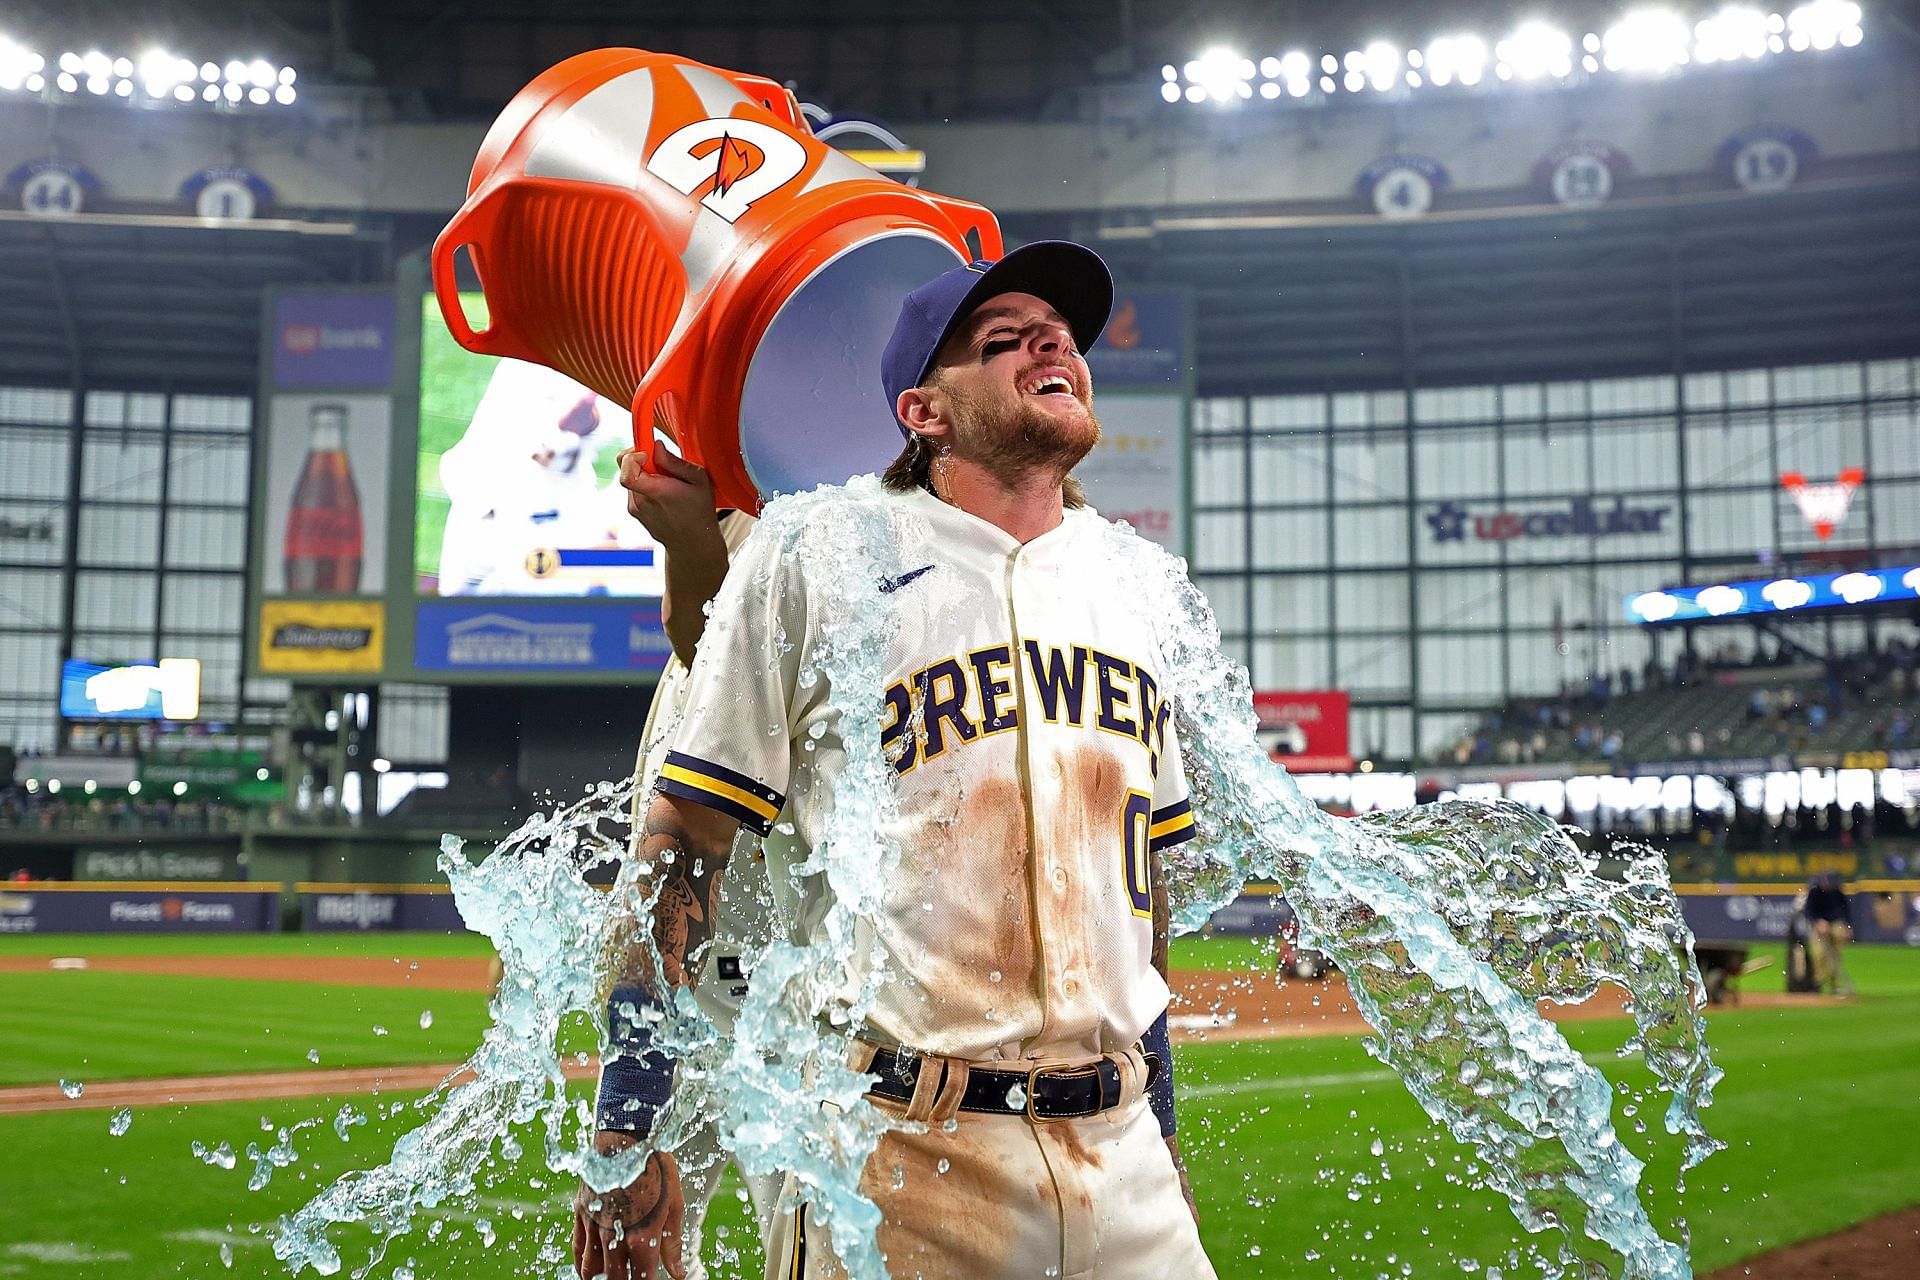 Mets vs. Brewers Recap: Missed opportunities, unfortunate events, and heads  hung low - Amazin' Avenue